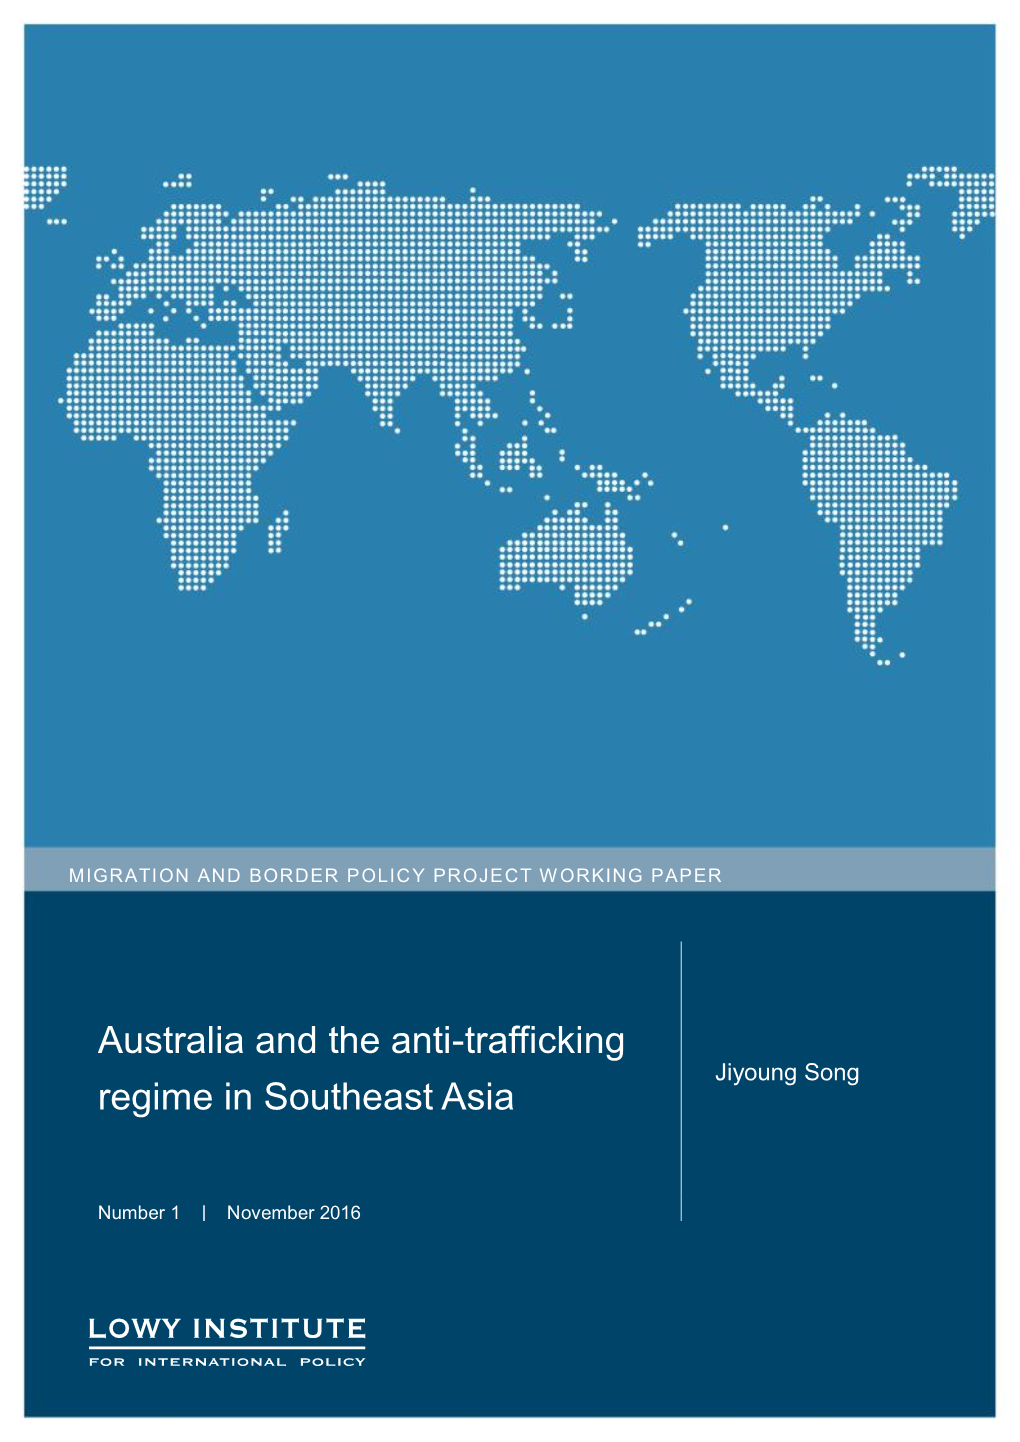 Australia and the Anti-Trafficking Regime in Southeast Asia